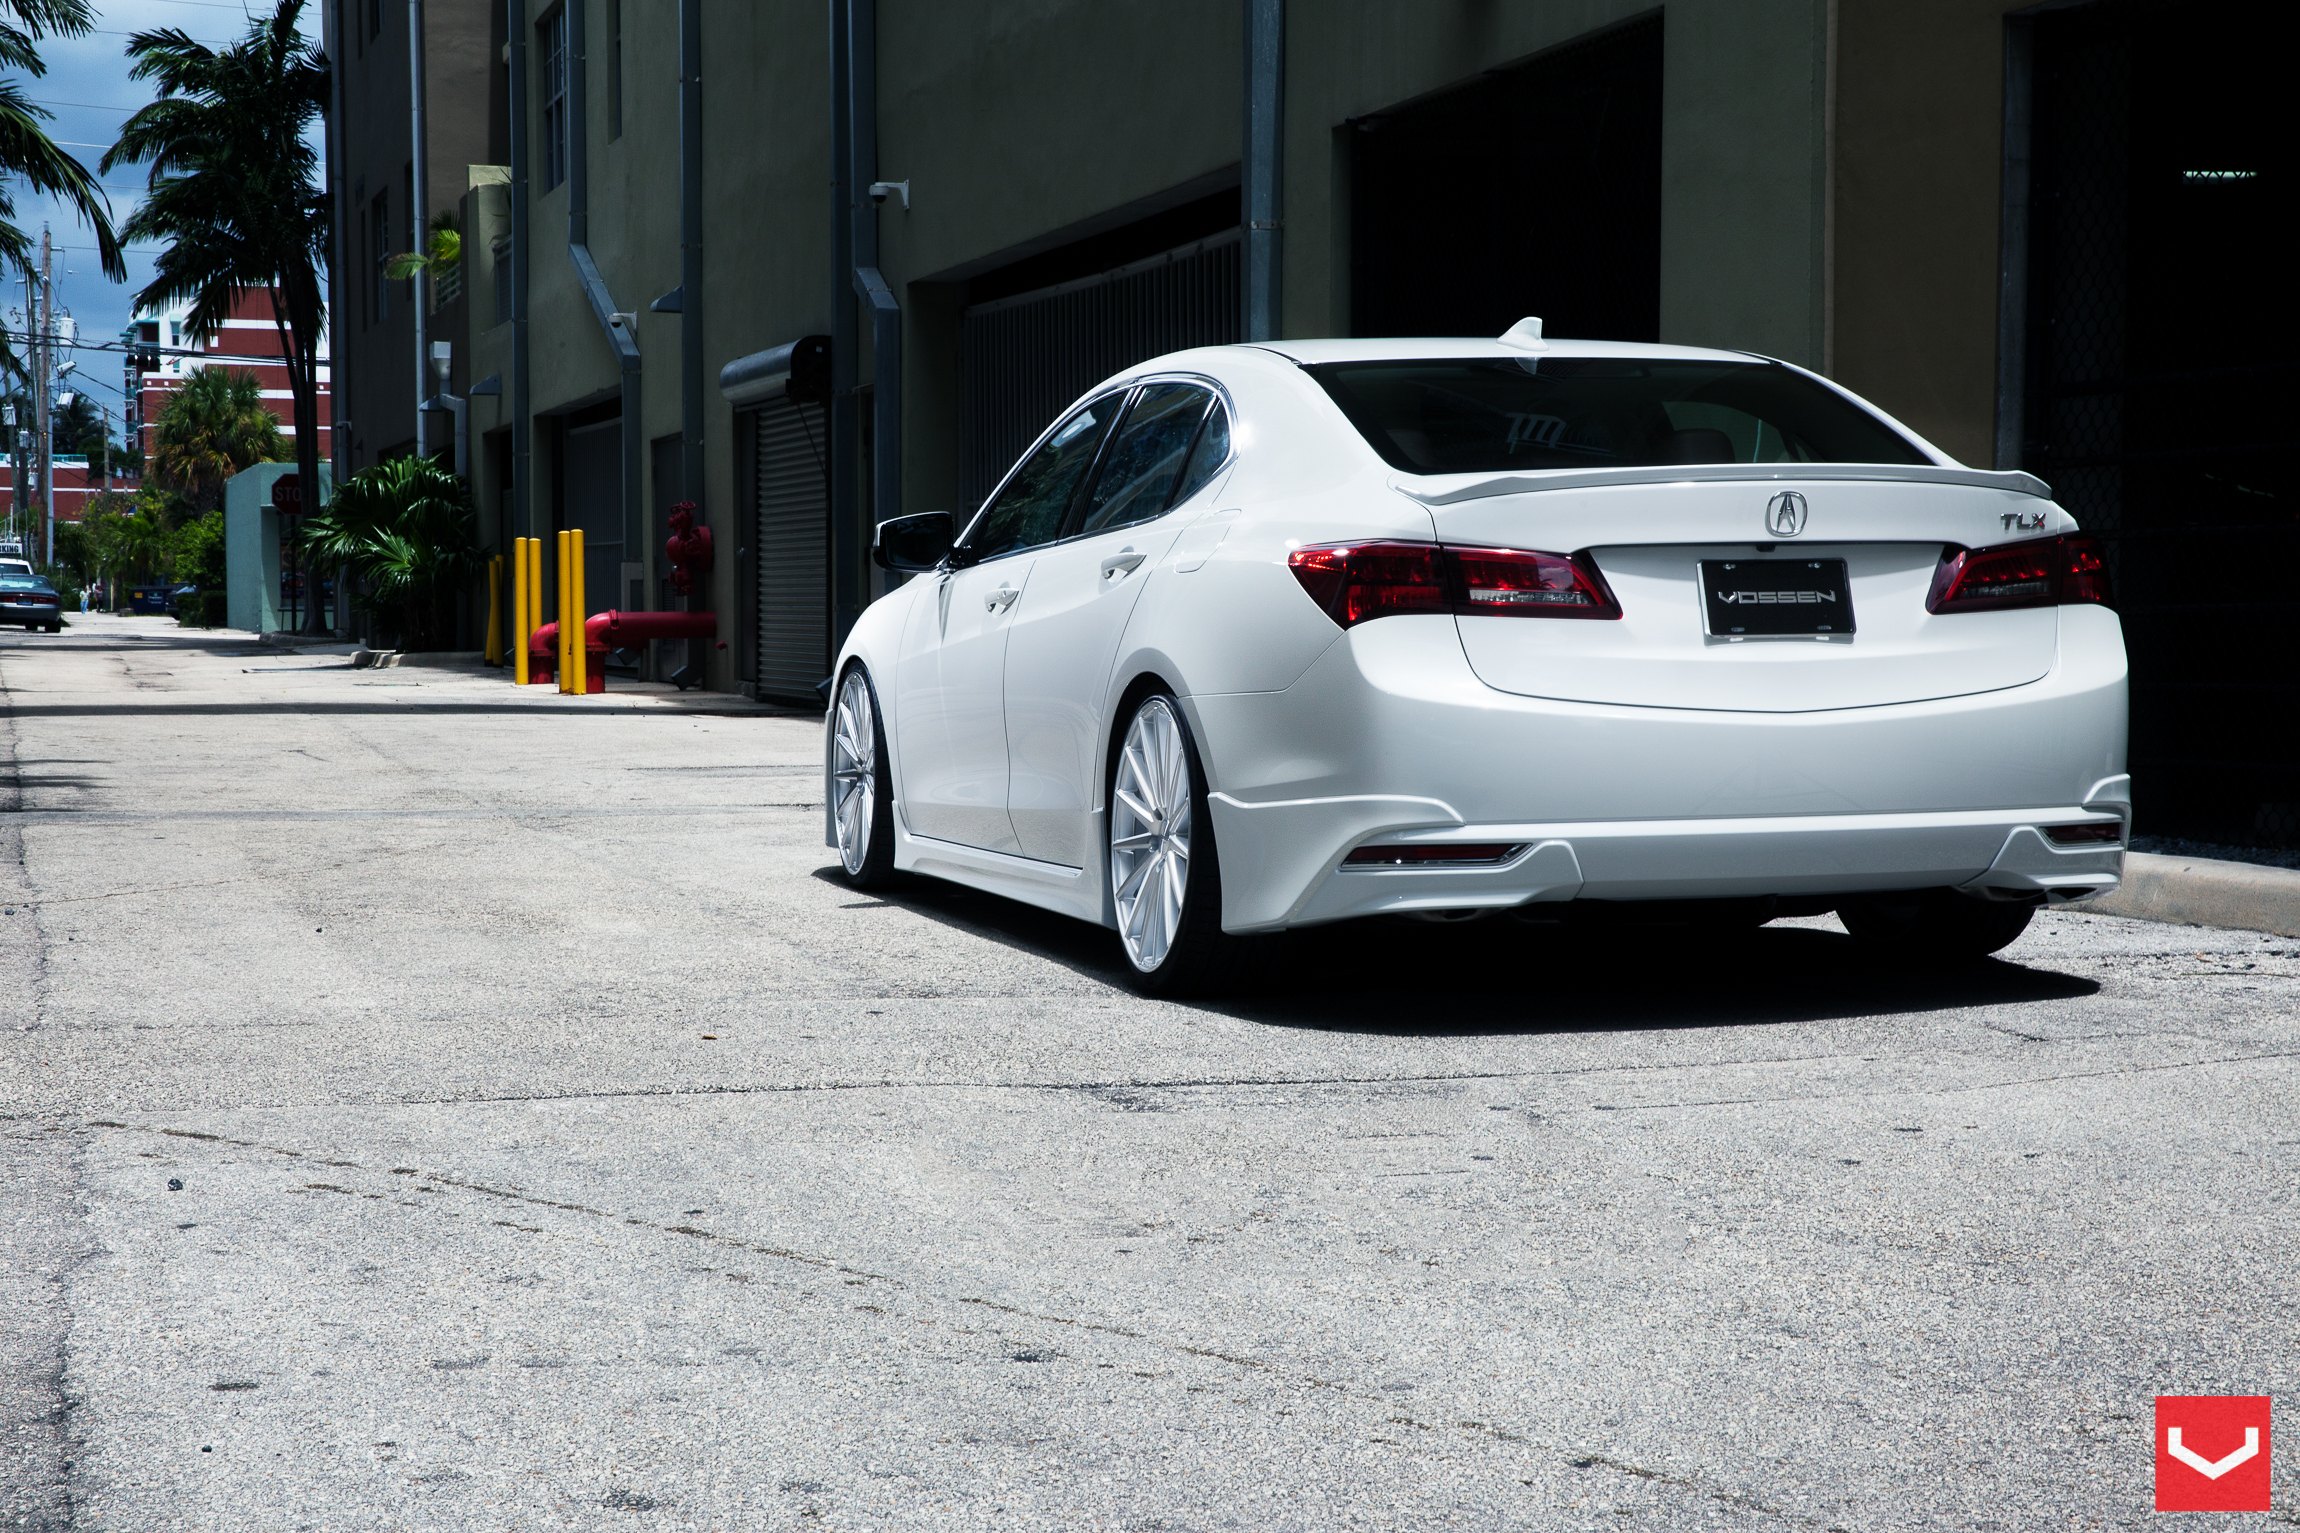 Rear Lip Spoiler on White Acura TLX - Photo by Vossen